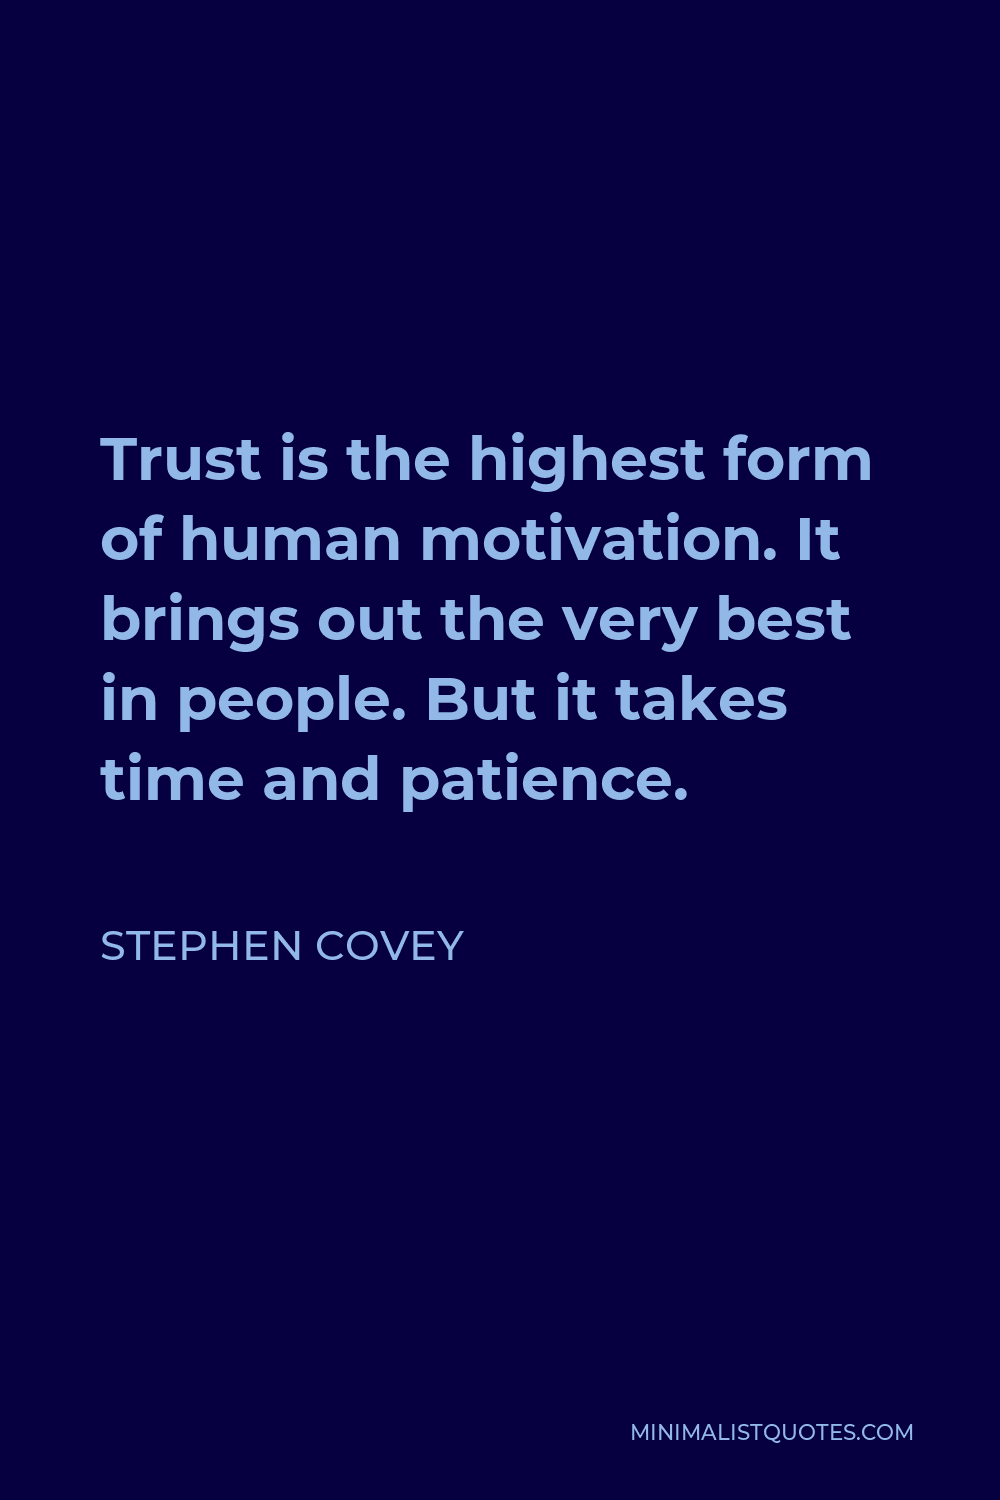 Stephen Covey Quote - Trust is the highest form of human motivation. It brings out the very best in people. But it takes time and patience.